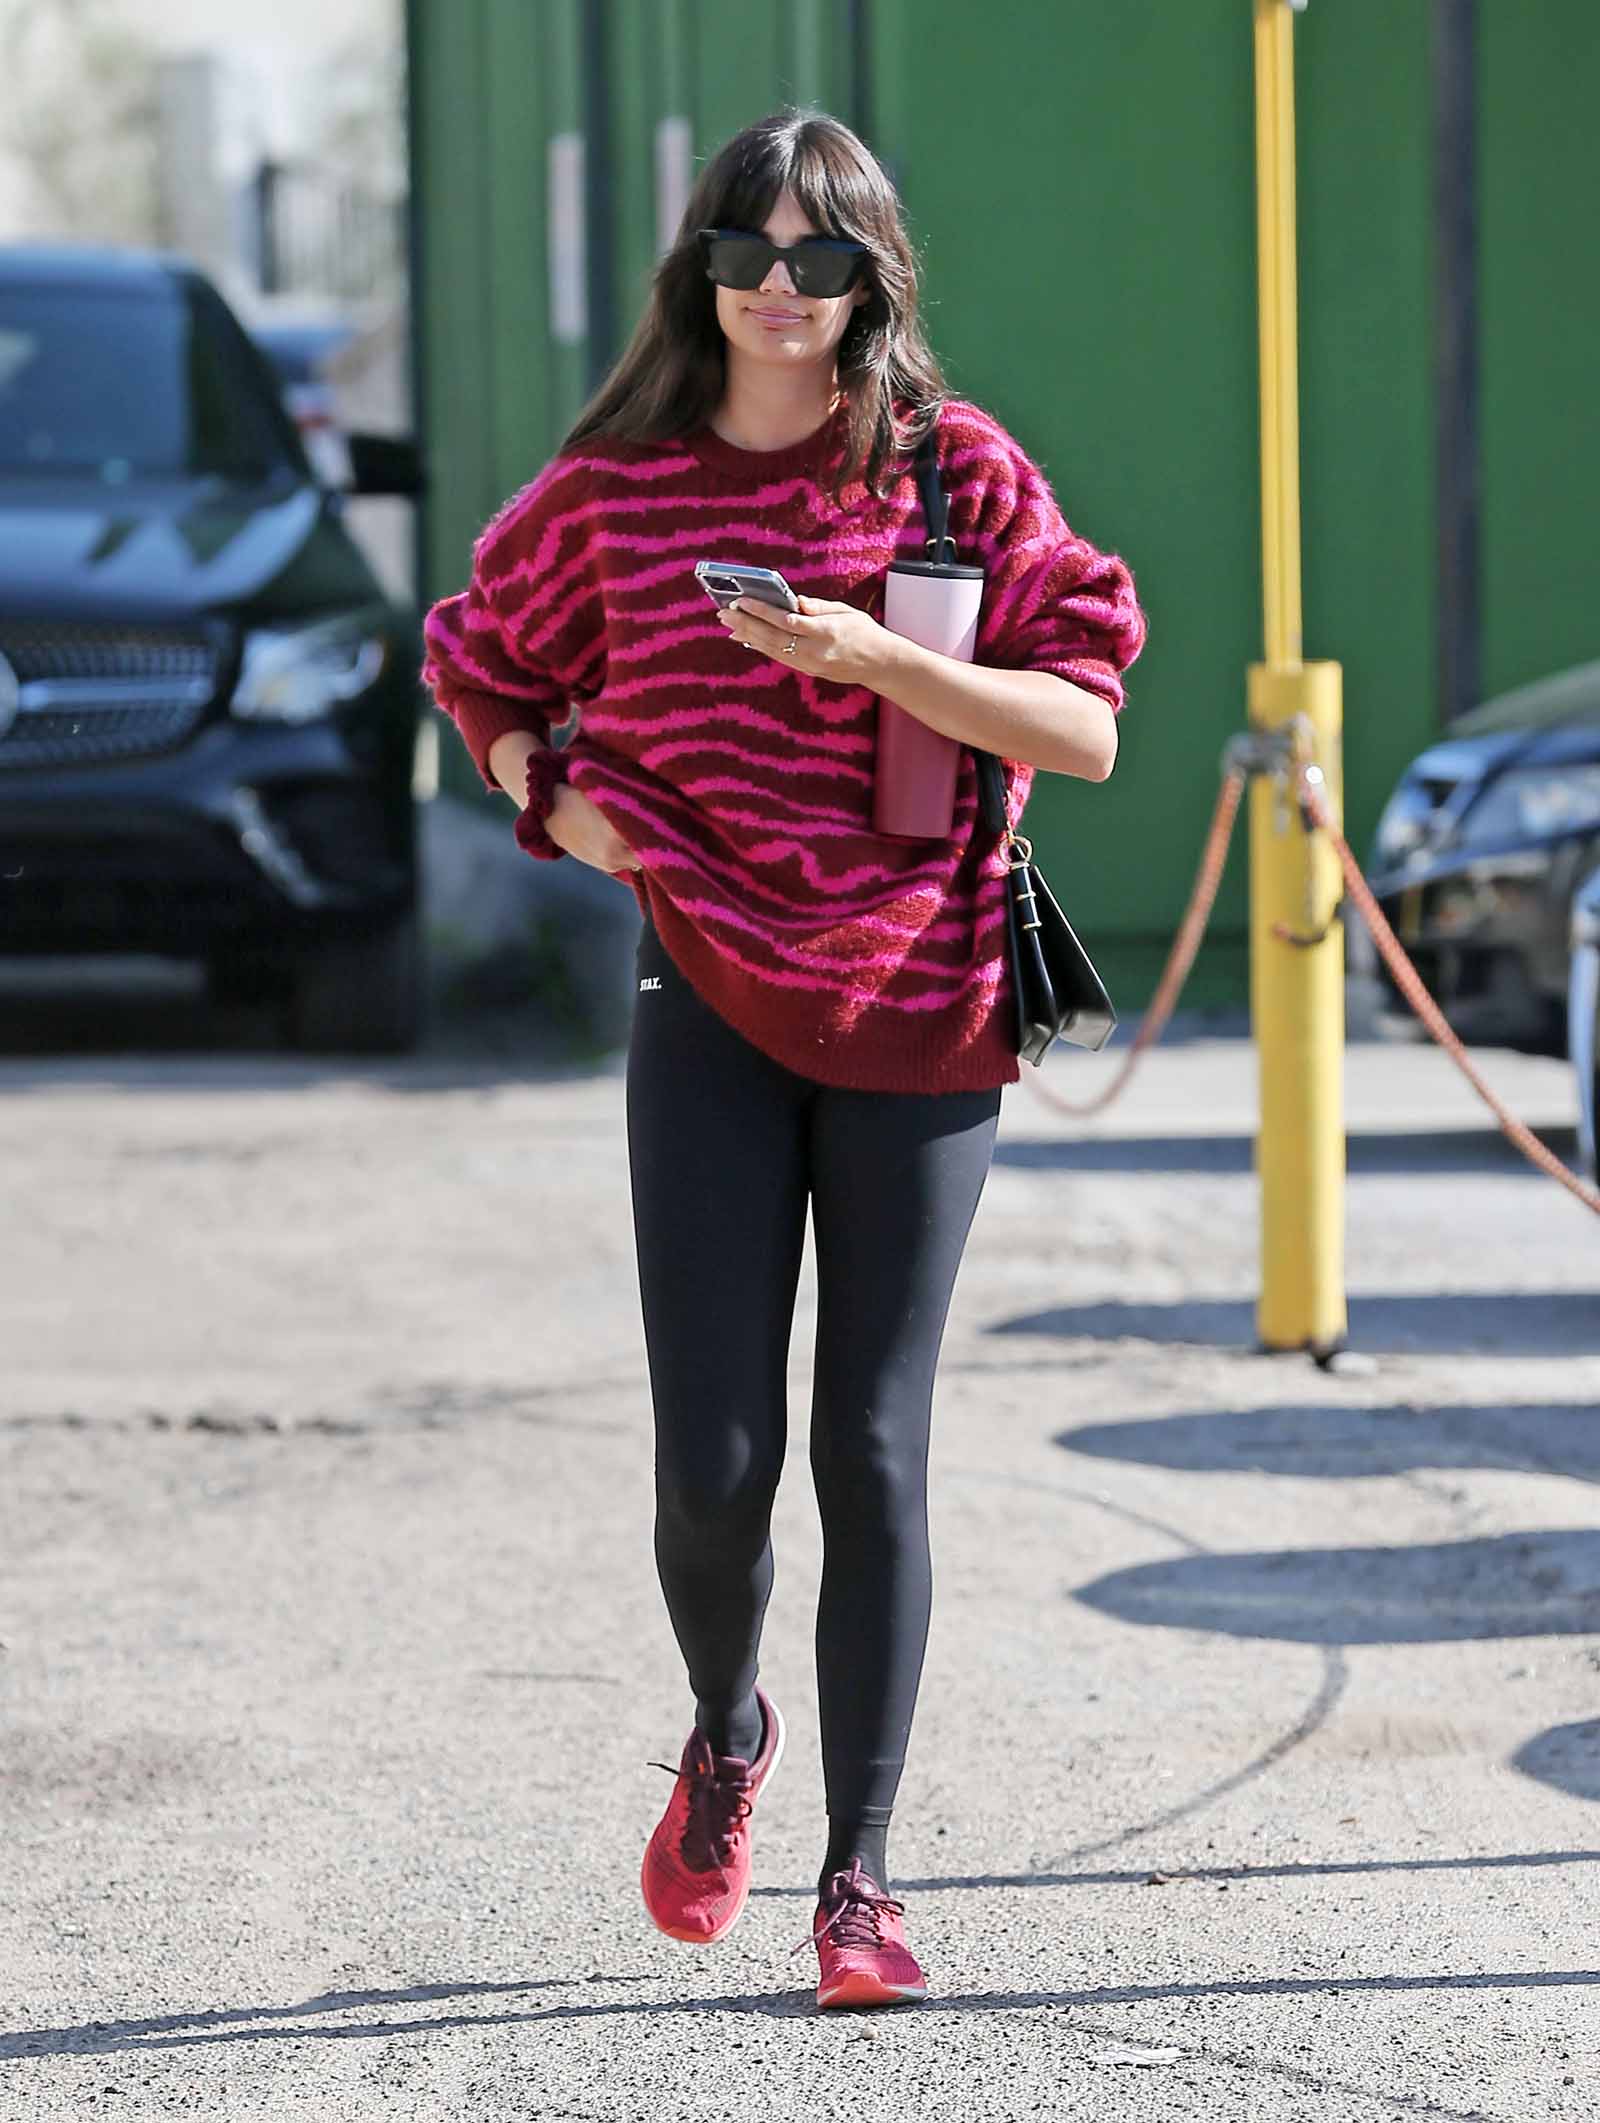 The Look for Less: Sara Sampaio's Colorful Sweater and Sneakers